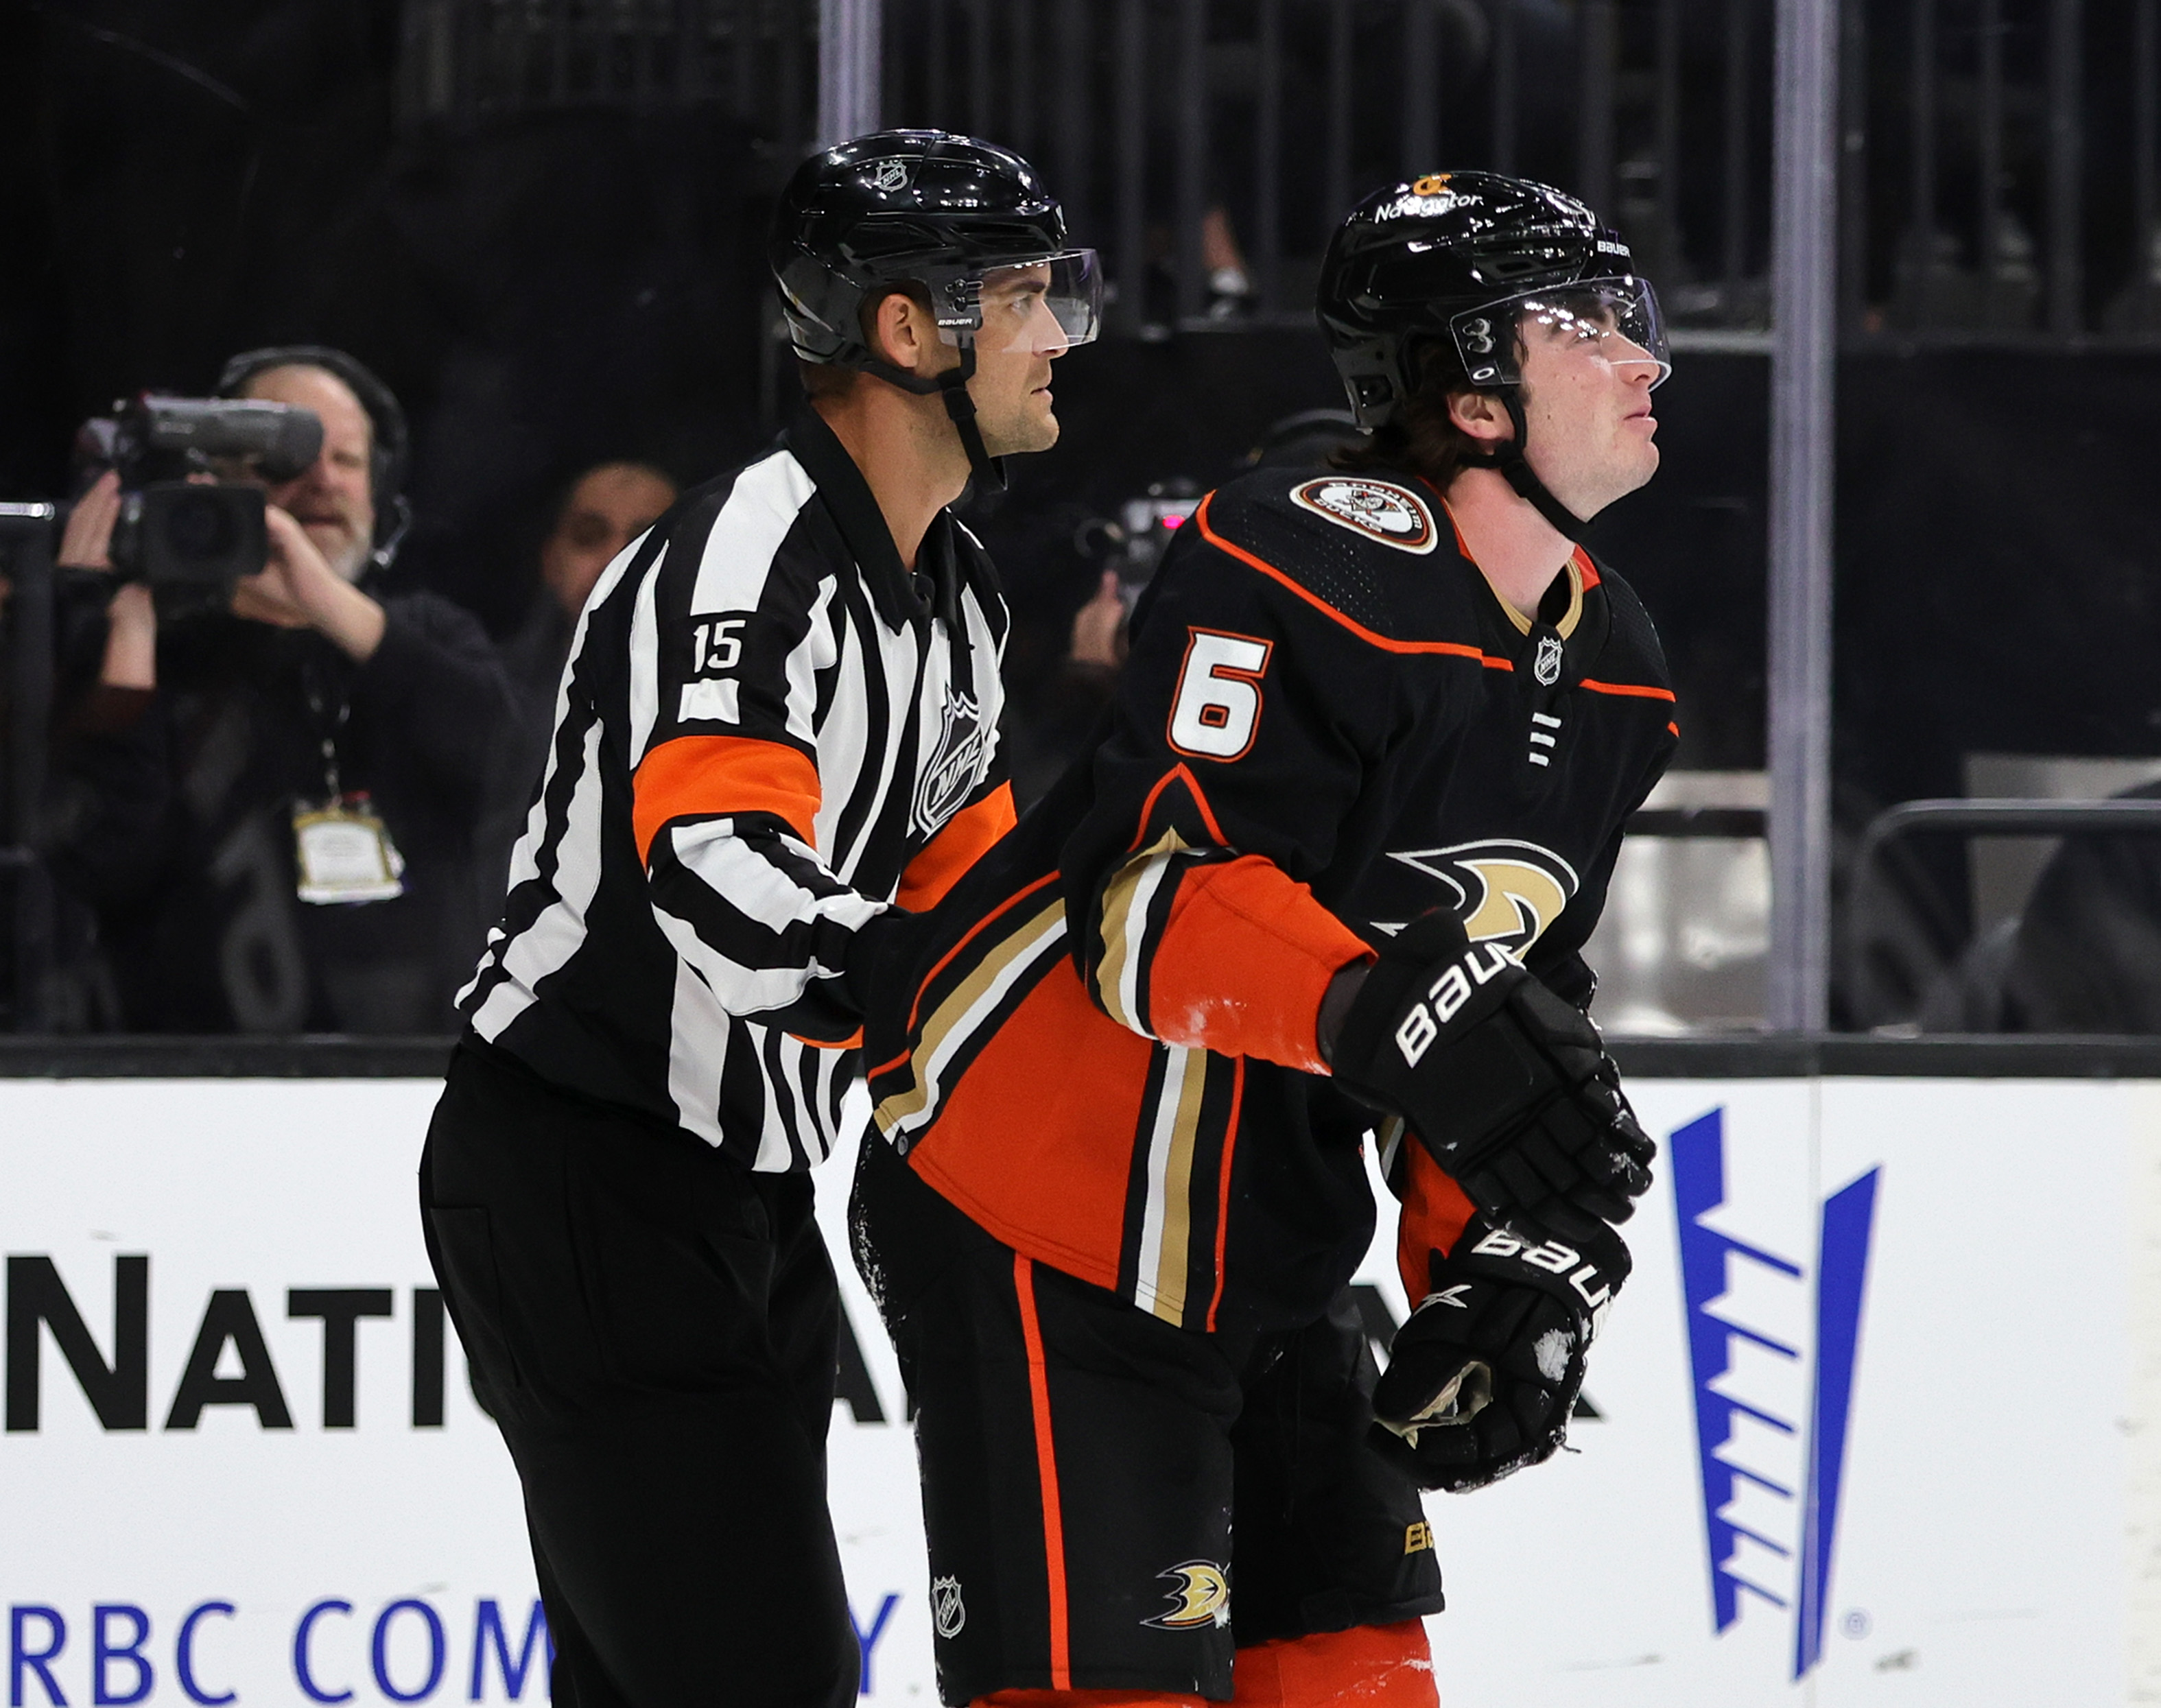 Referee Jean Hebert helps Jamie Drysdale #6 of the Anaheim Ducks off the ice after he suffered an upper body injury in the second period of a game against the Vegas Golden Knights at T-Mobile Arena on October 28, 2022 in Las Vegas, Nevada. The Golden Knights defeated the Ducks 4-0.